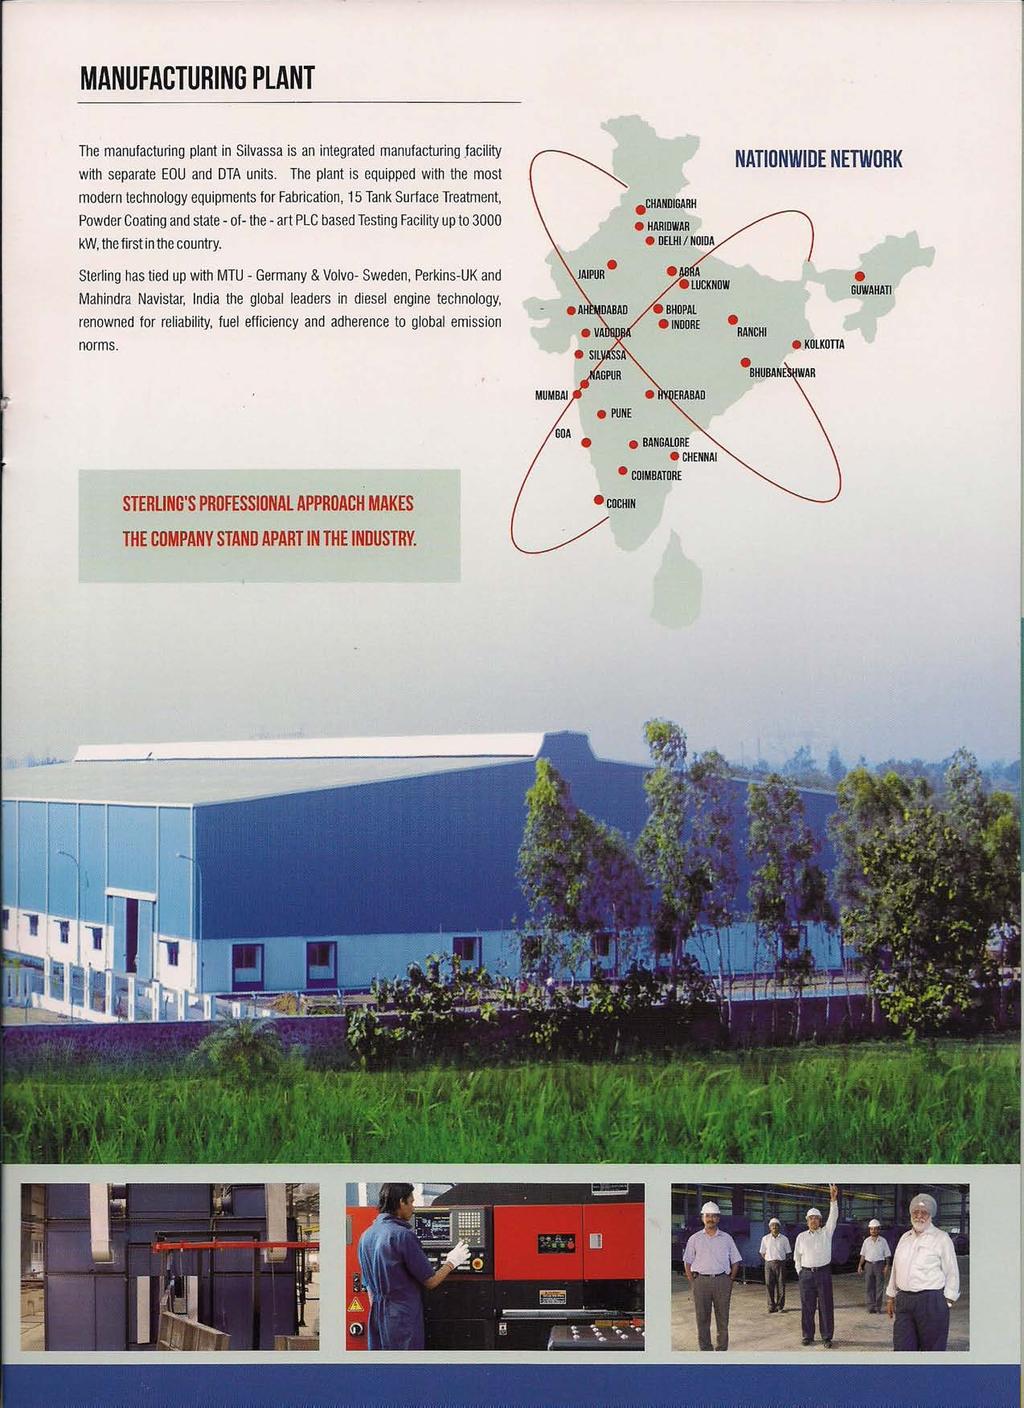 MANUFACTURING PLANT The manufacturing plant in Silvassa is an integrated manufacturing,facility with separate EOU and DTA units.